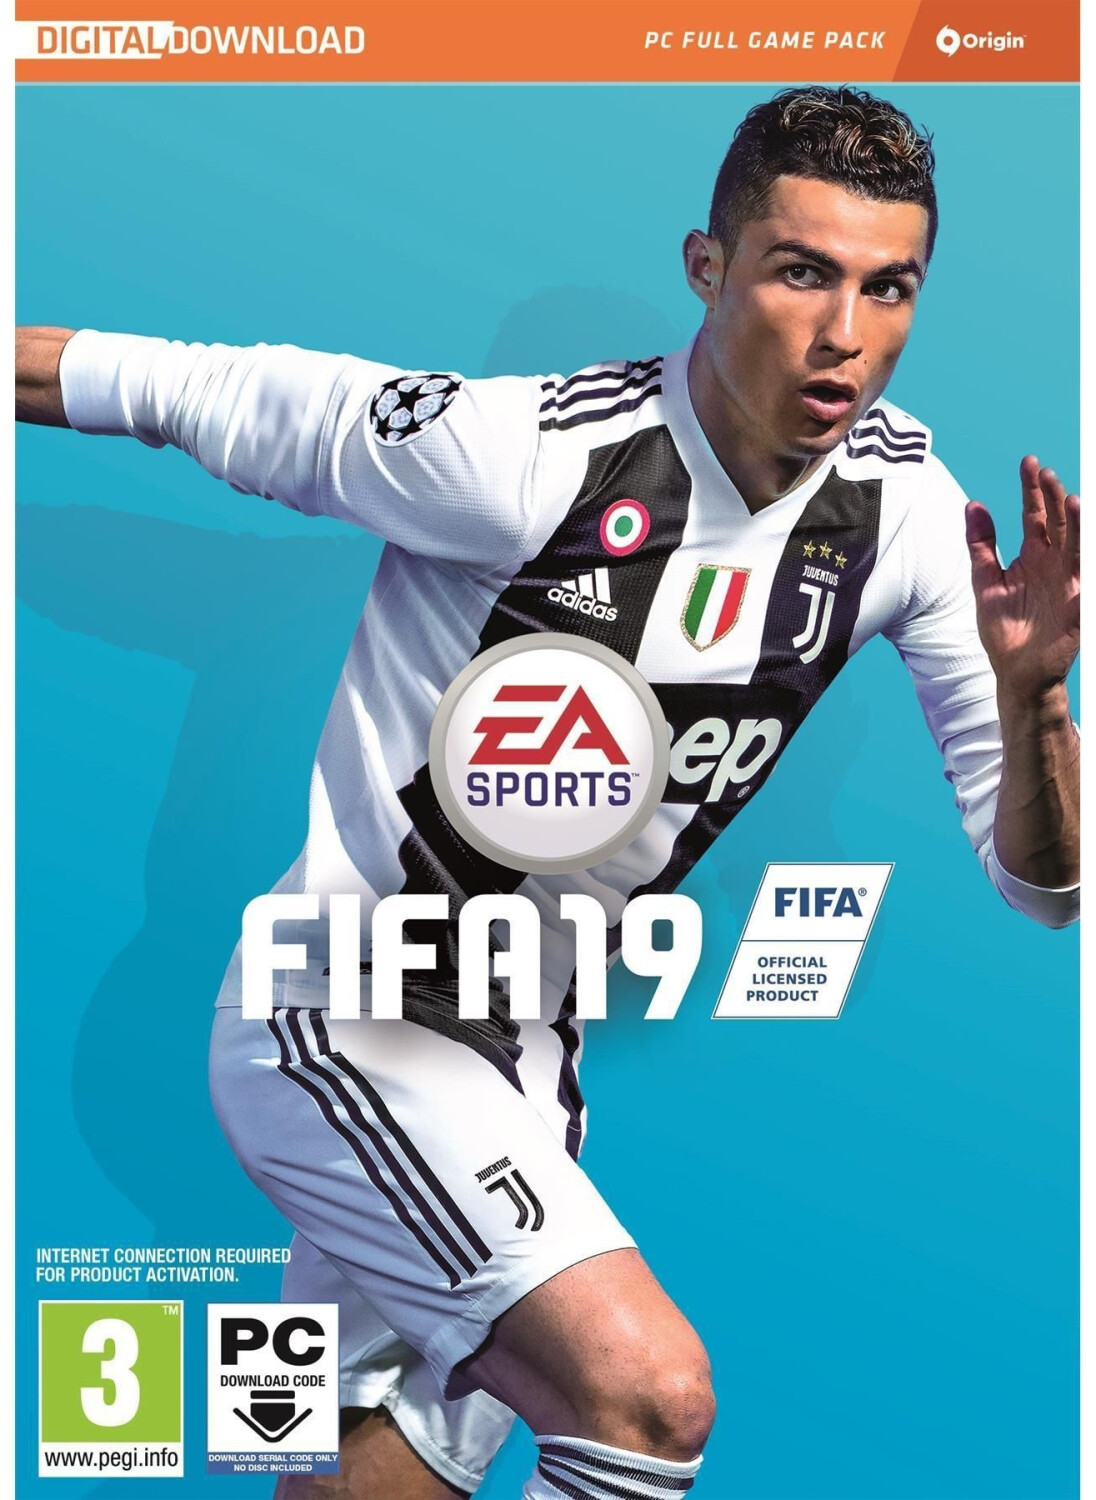 Buy FIFA 19 from £5.97 (Today) – January sales on idealo.co.uk